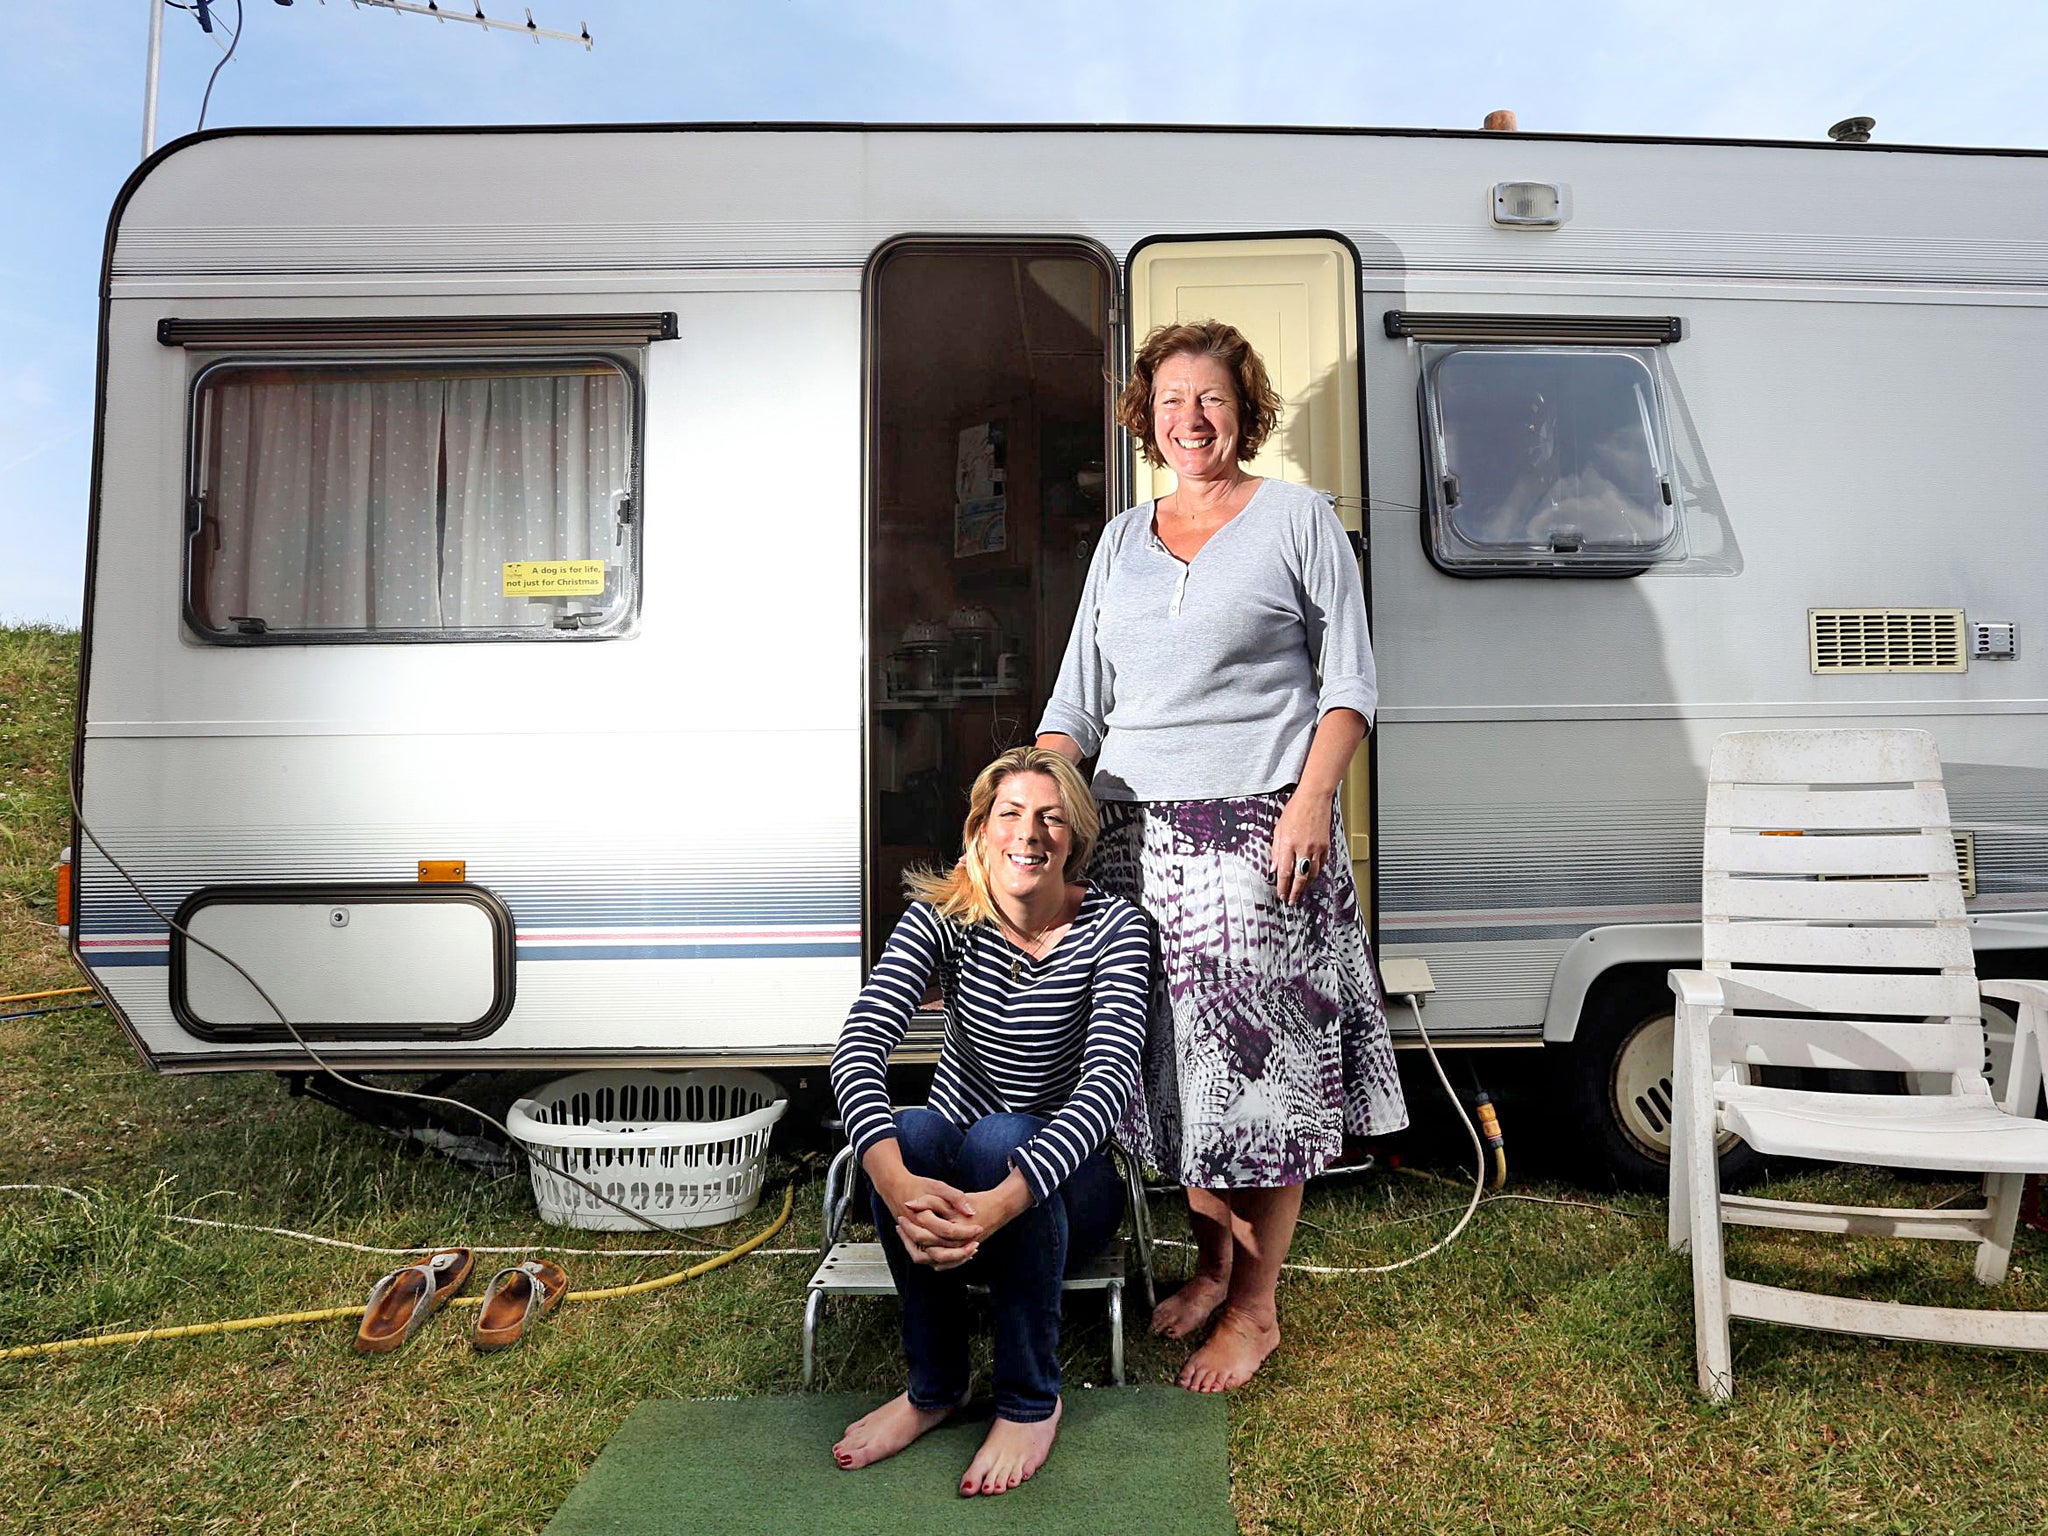 Fairground attraction: Zoah Hedges-Stocks, 23, with her
mother Bernice outside their caravan